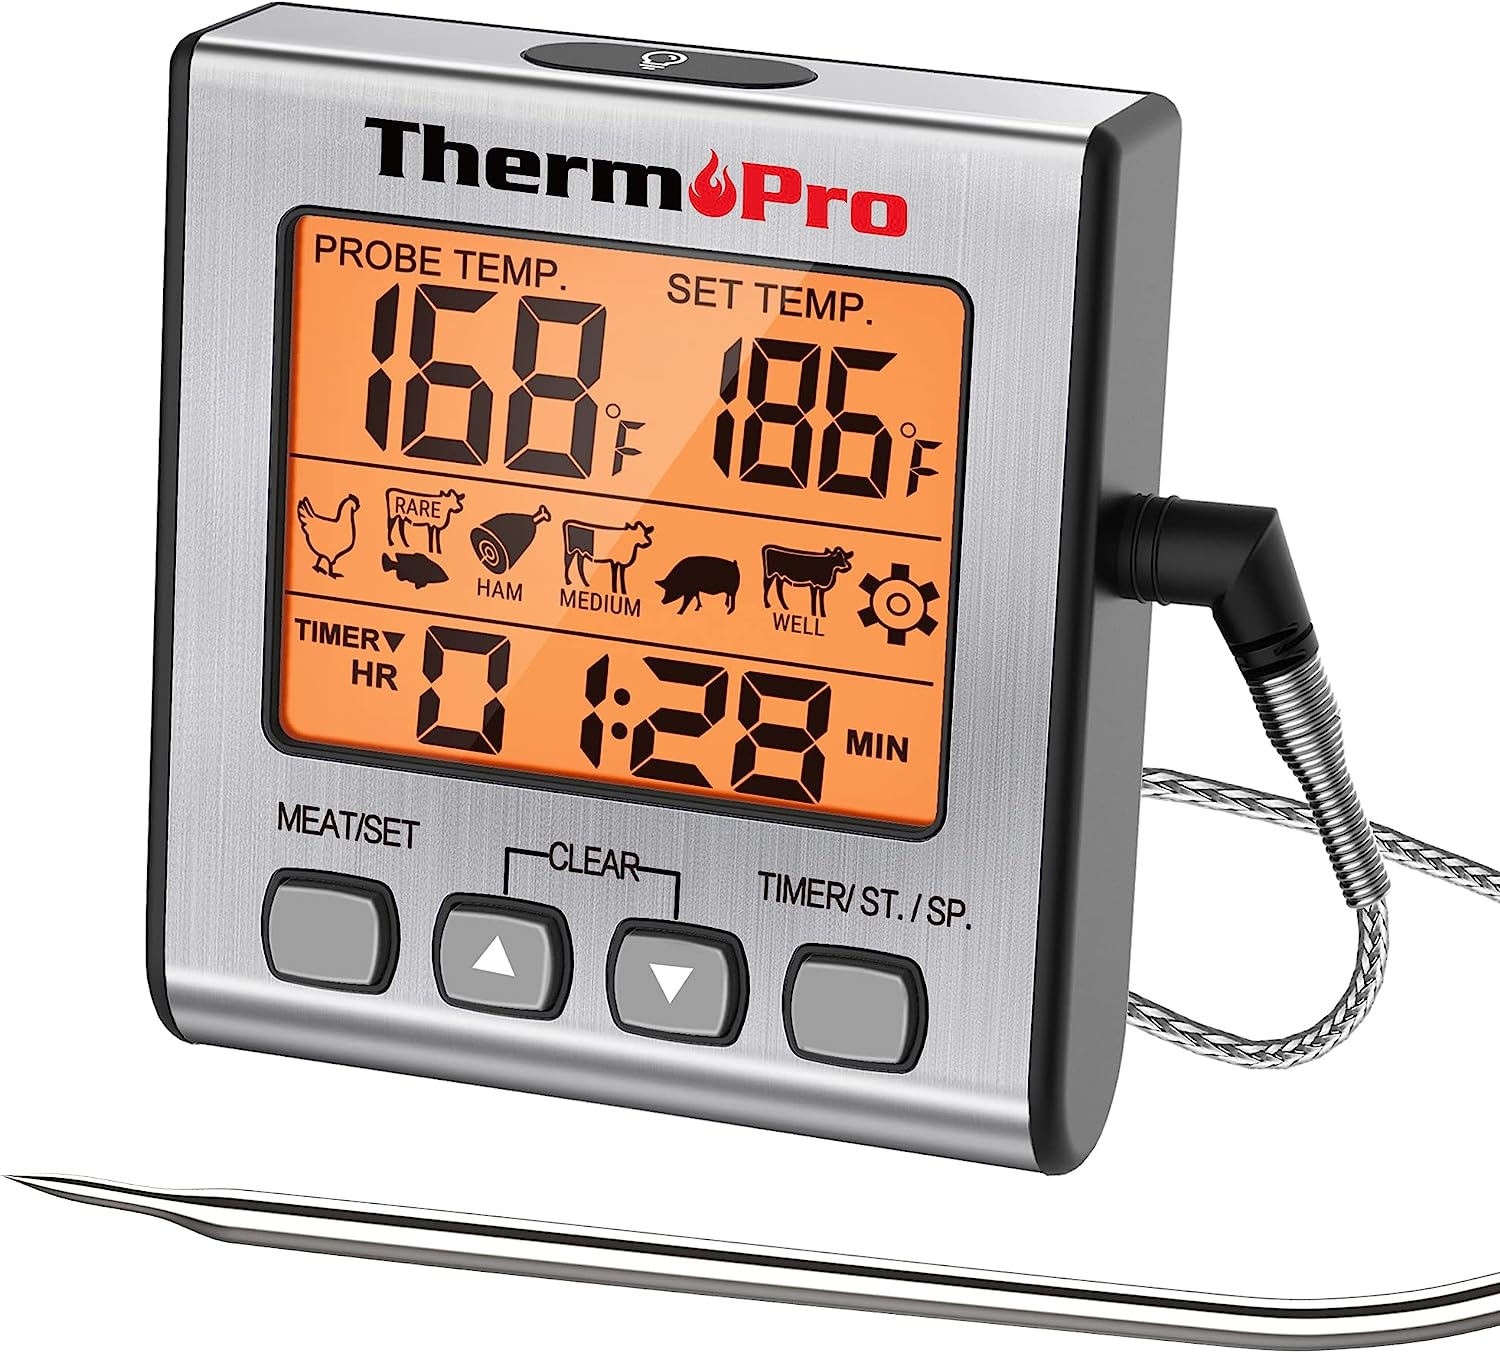 ThermoPro TP16S Digital Meat Thermometer for Cooking [...]